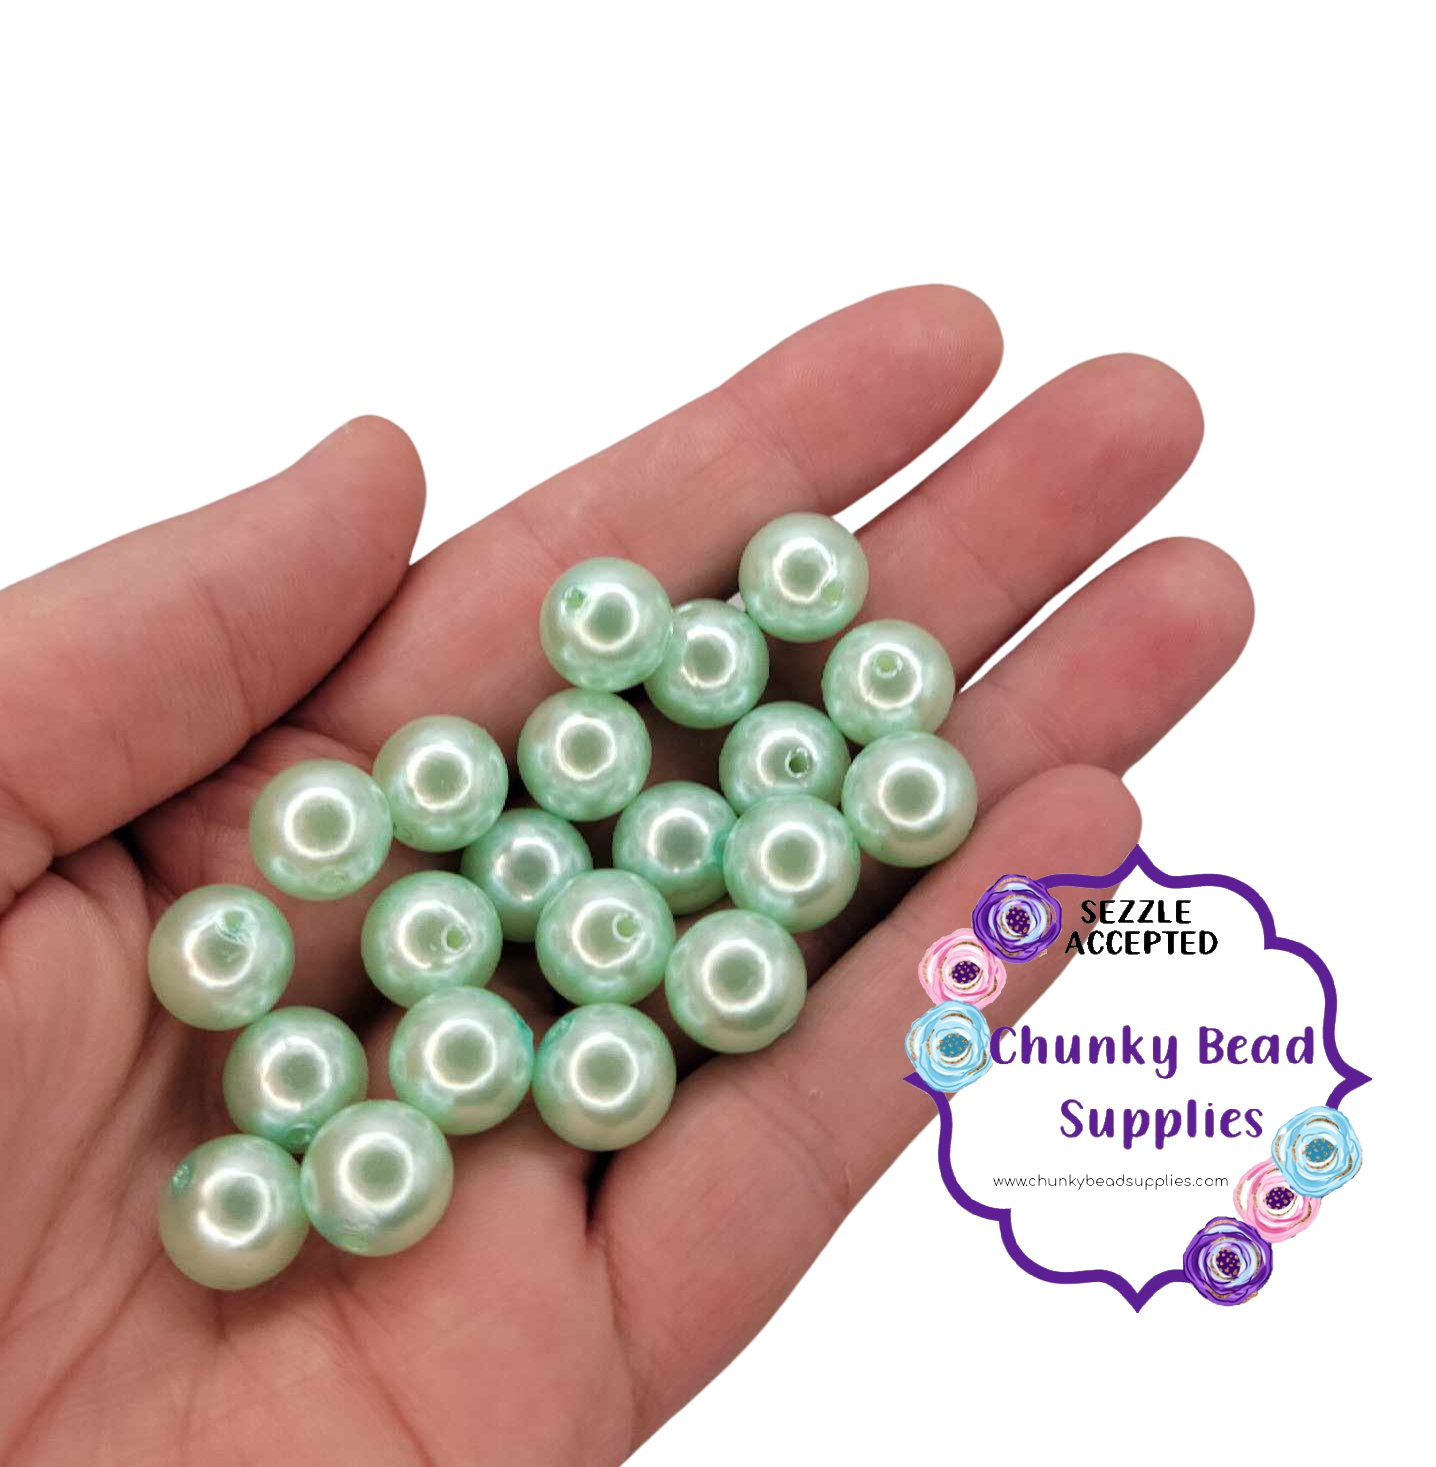 12mm "Mint Blue" Acrylic Pearl Beads